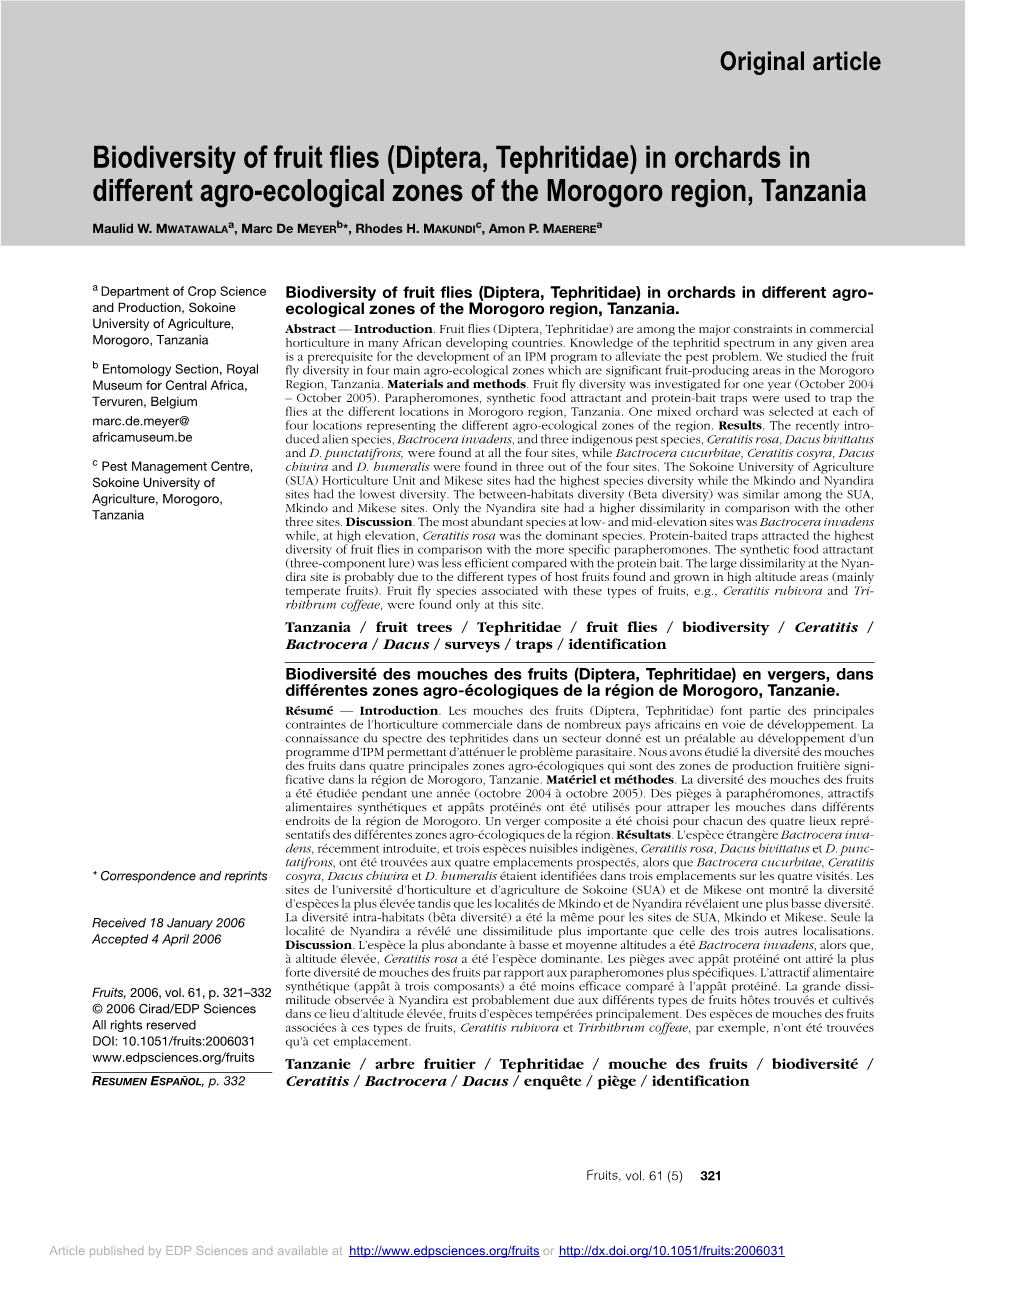 Biodiversity of Fruit Flies (Diptera, Tephritidae) in Orchards in Different Agro-Ecological Zones of the Morogoro Region, Tanzania